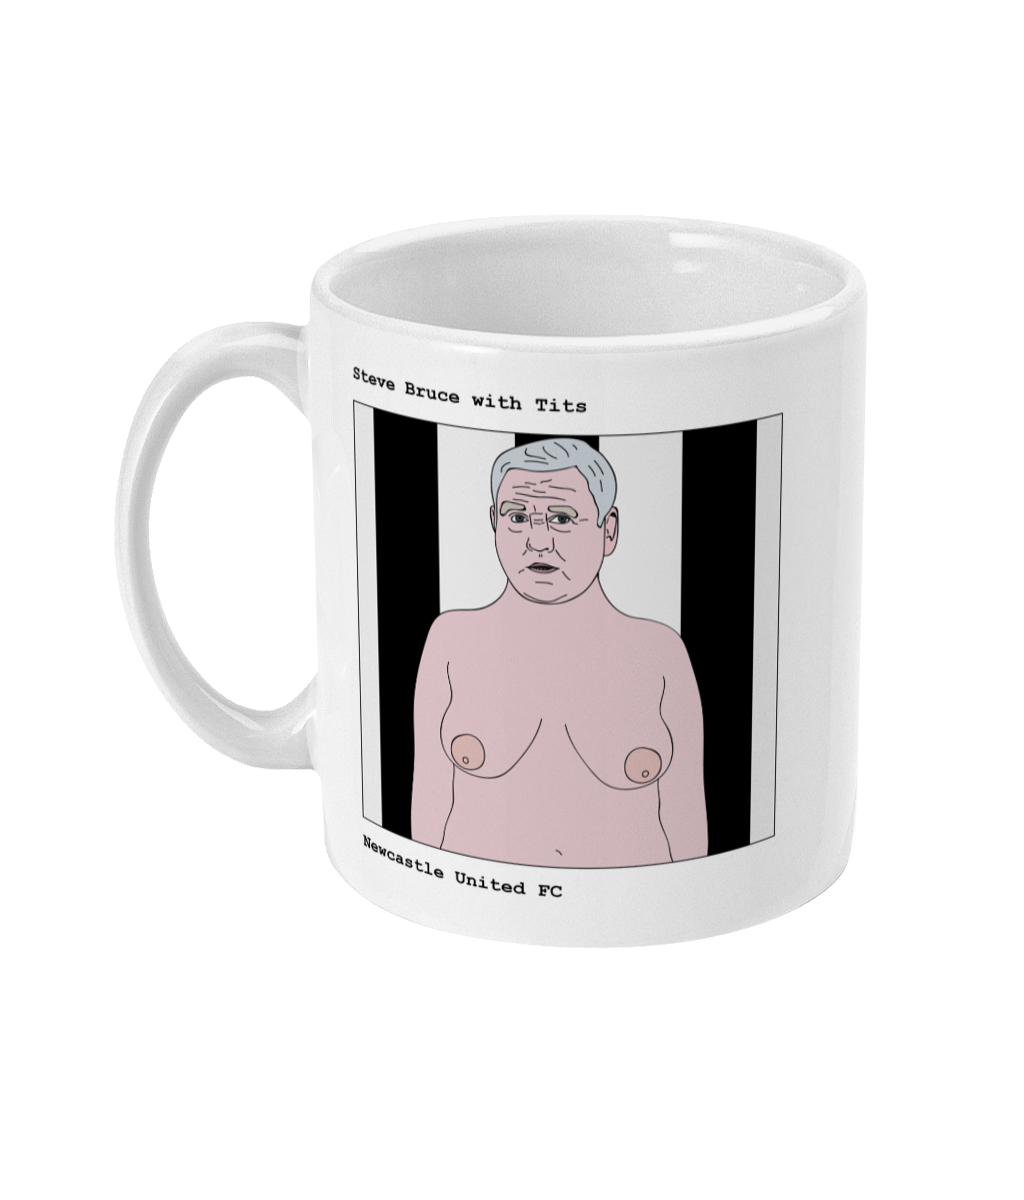 Steve Bruce with Tits - Footballers with Tits